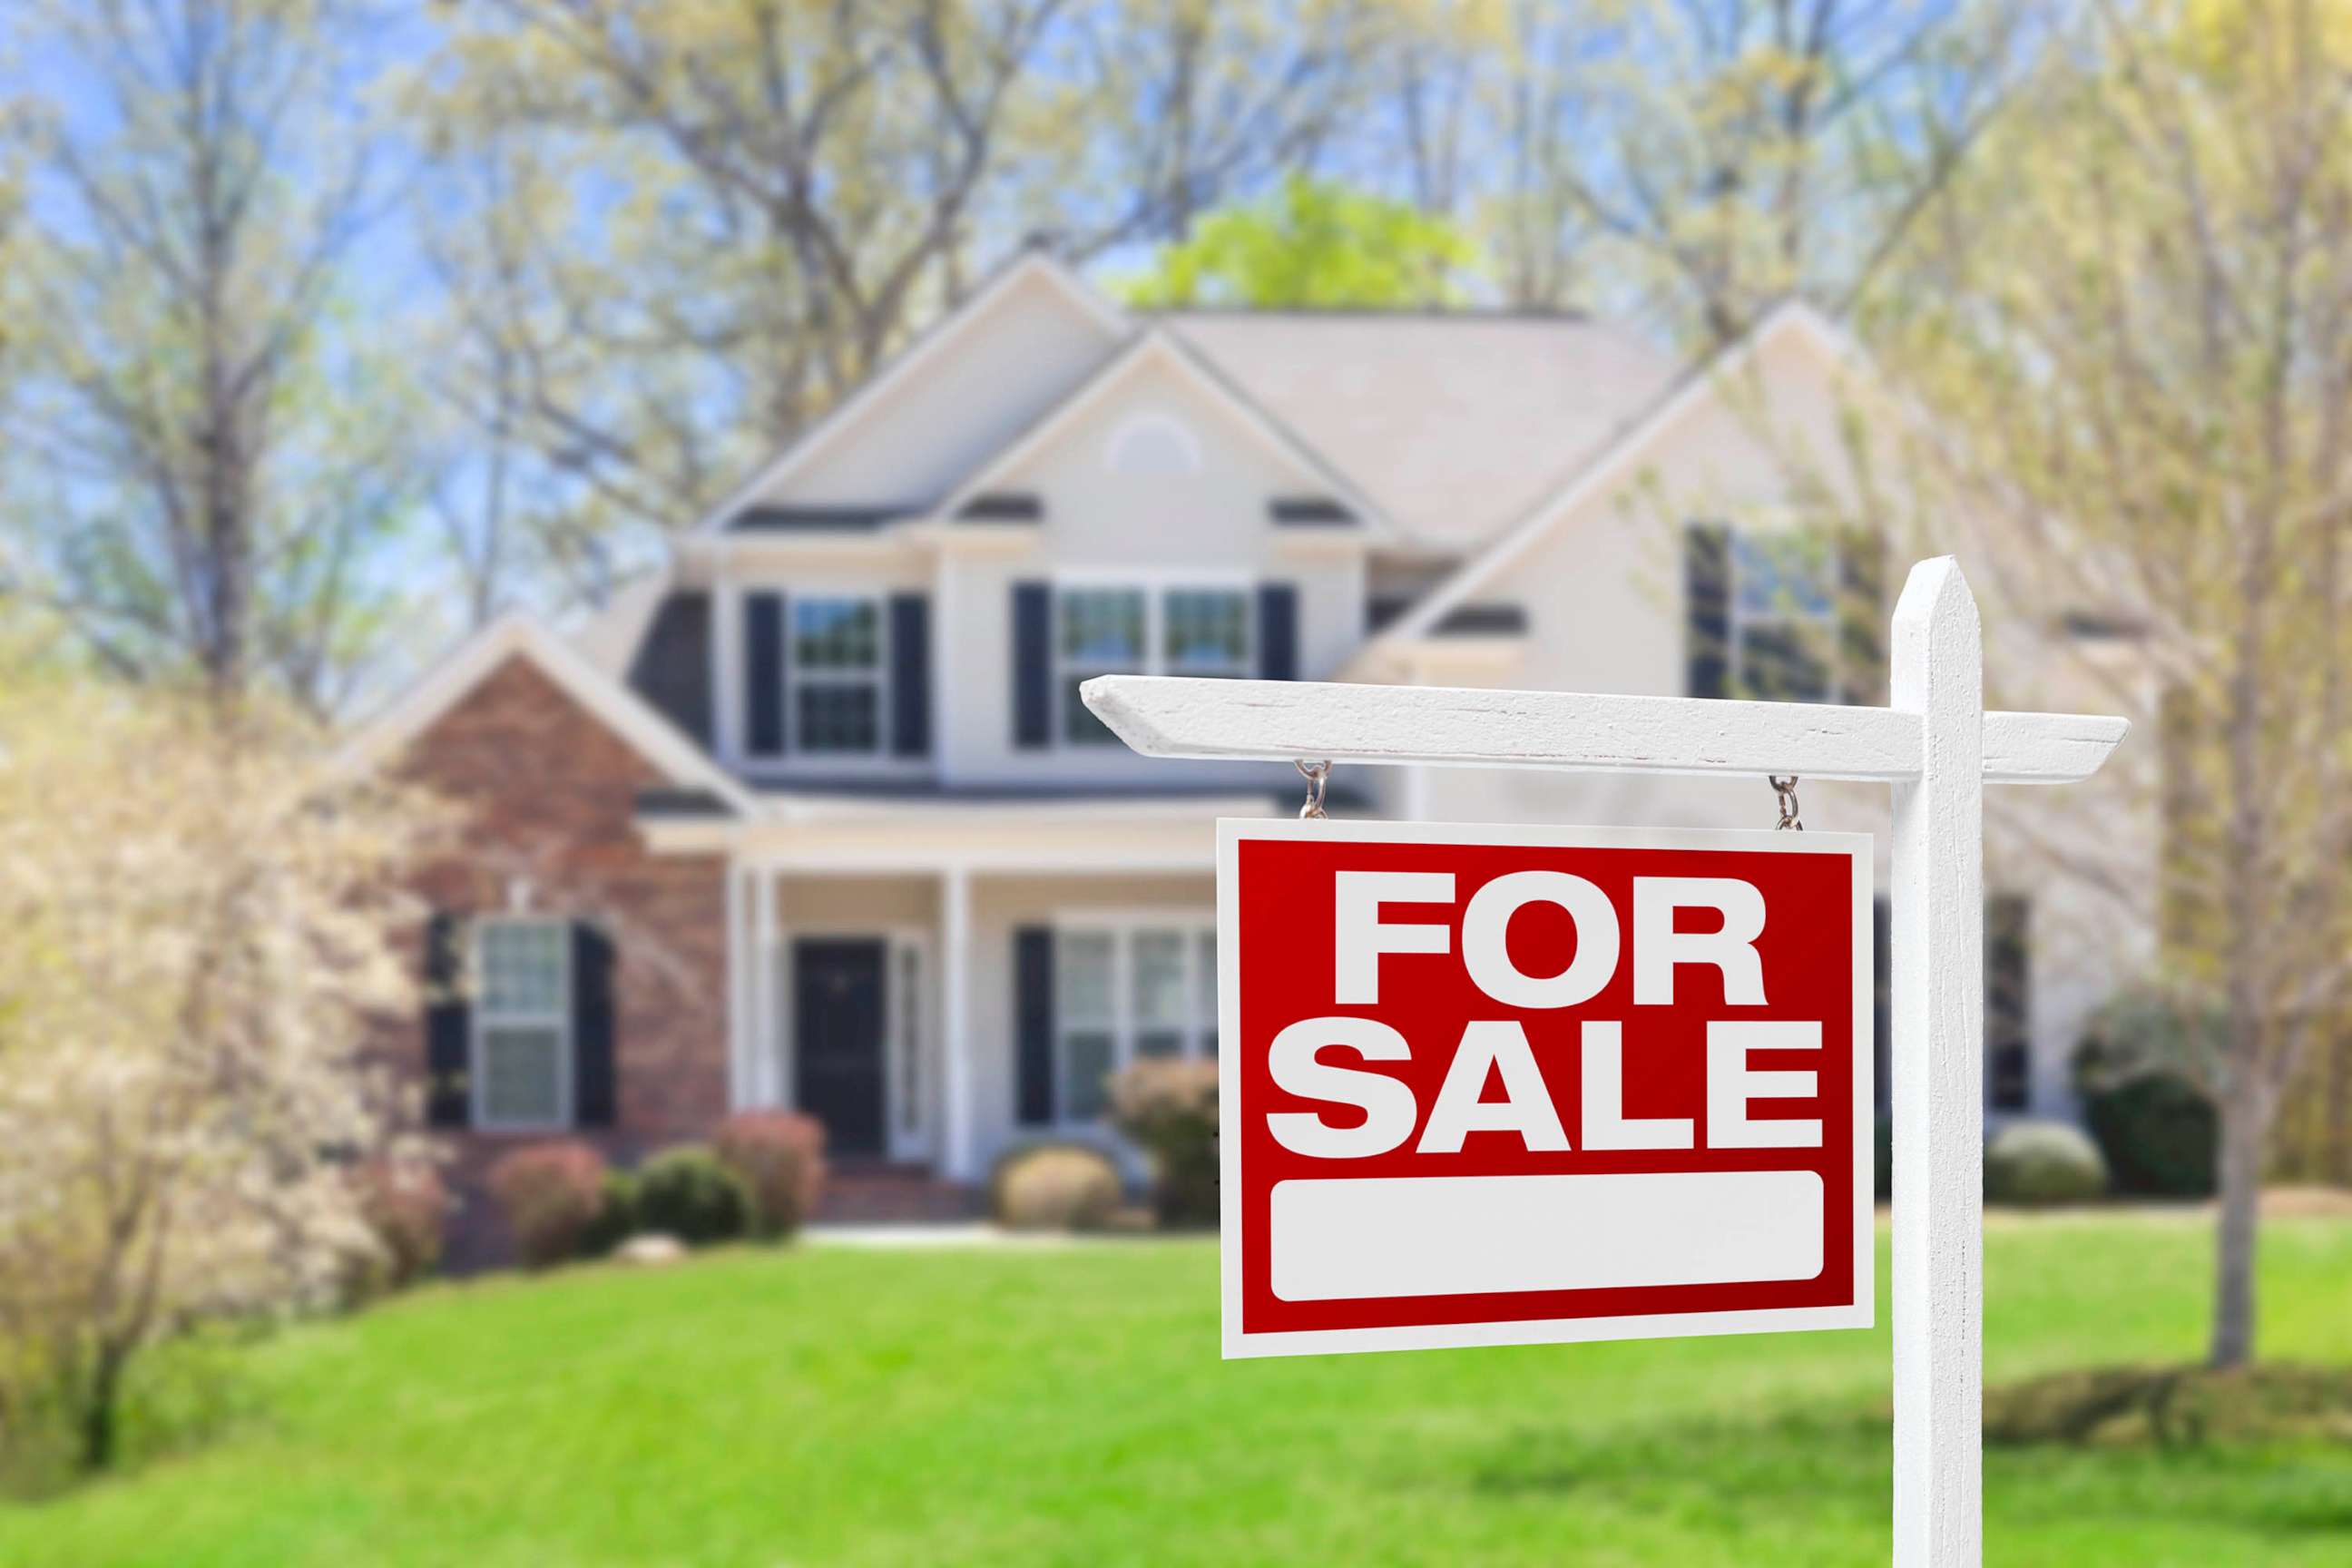 STOCK PHOTO: In this undated stock photo, a "For Sale" sign stands in front of a house.